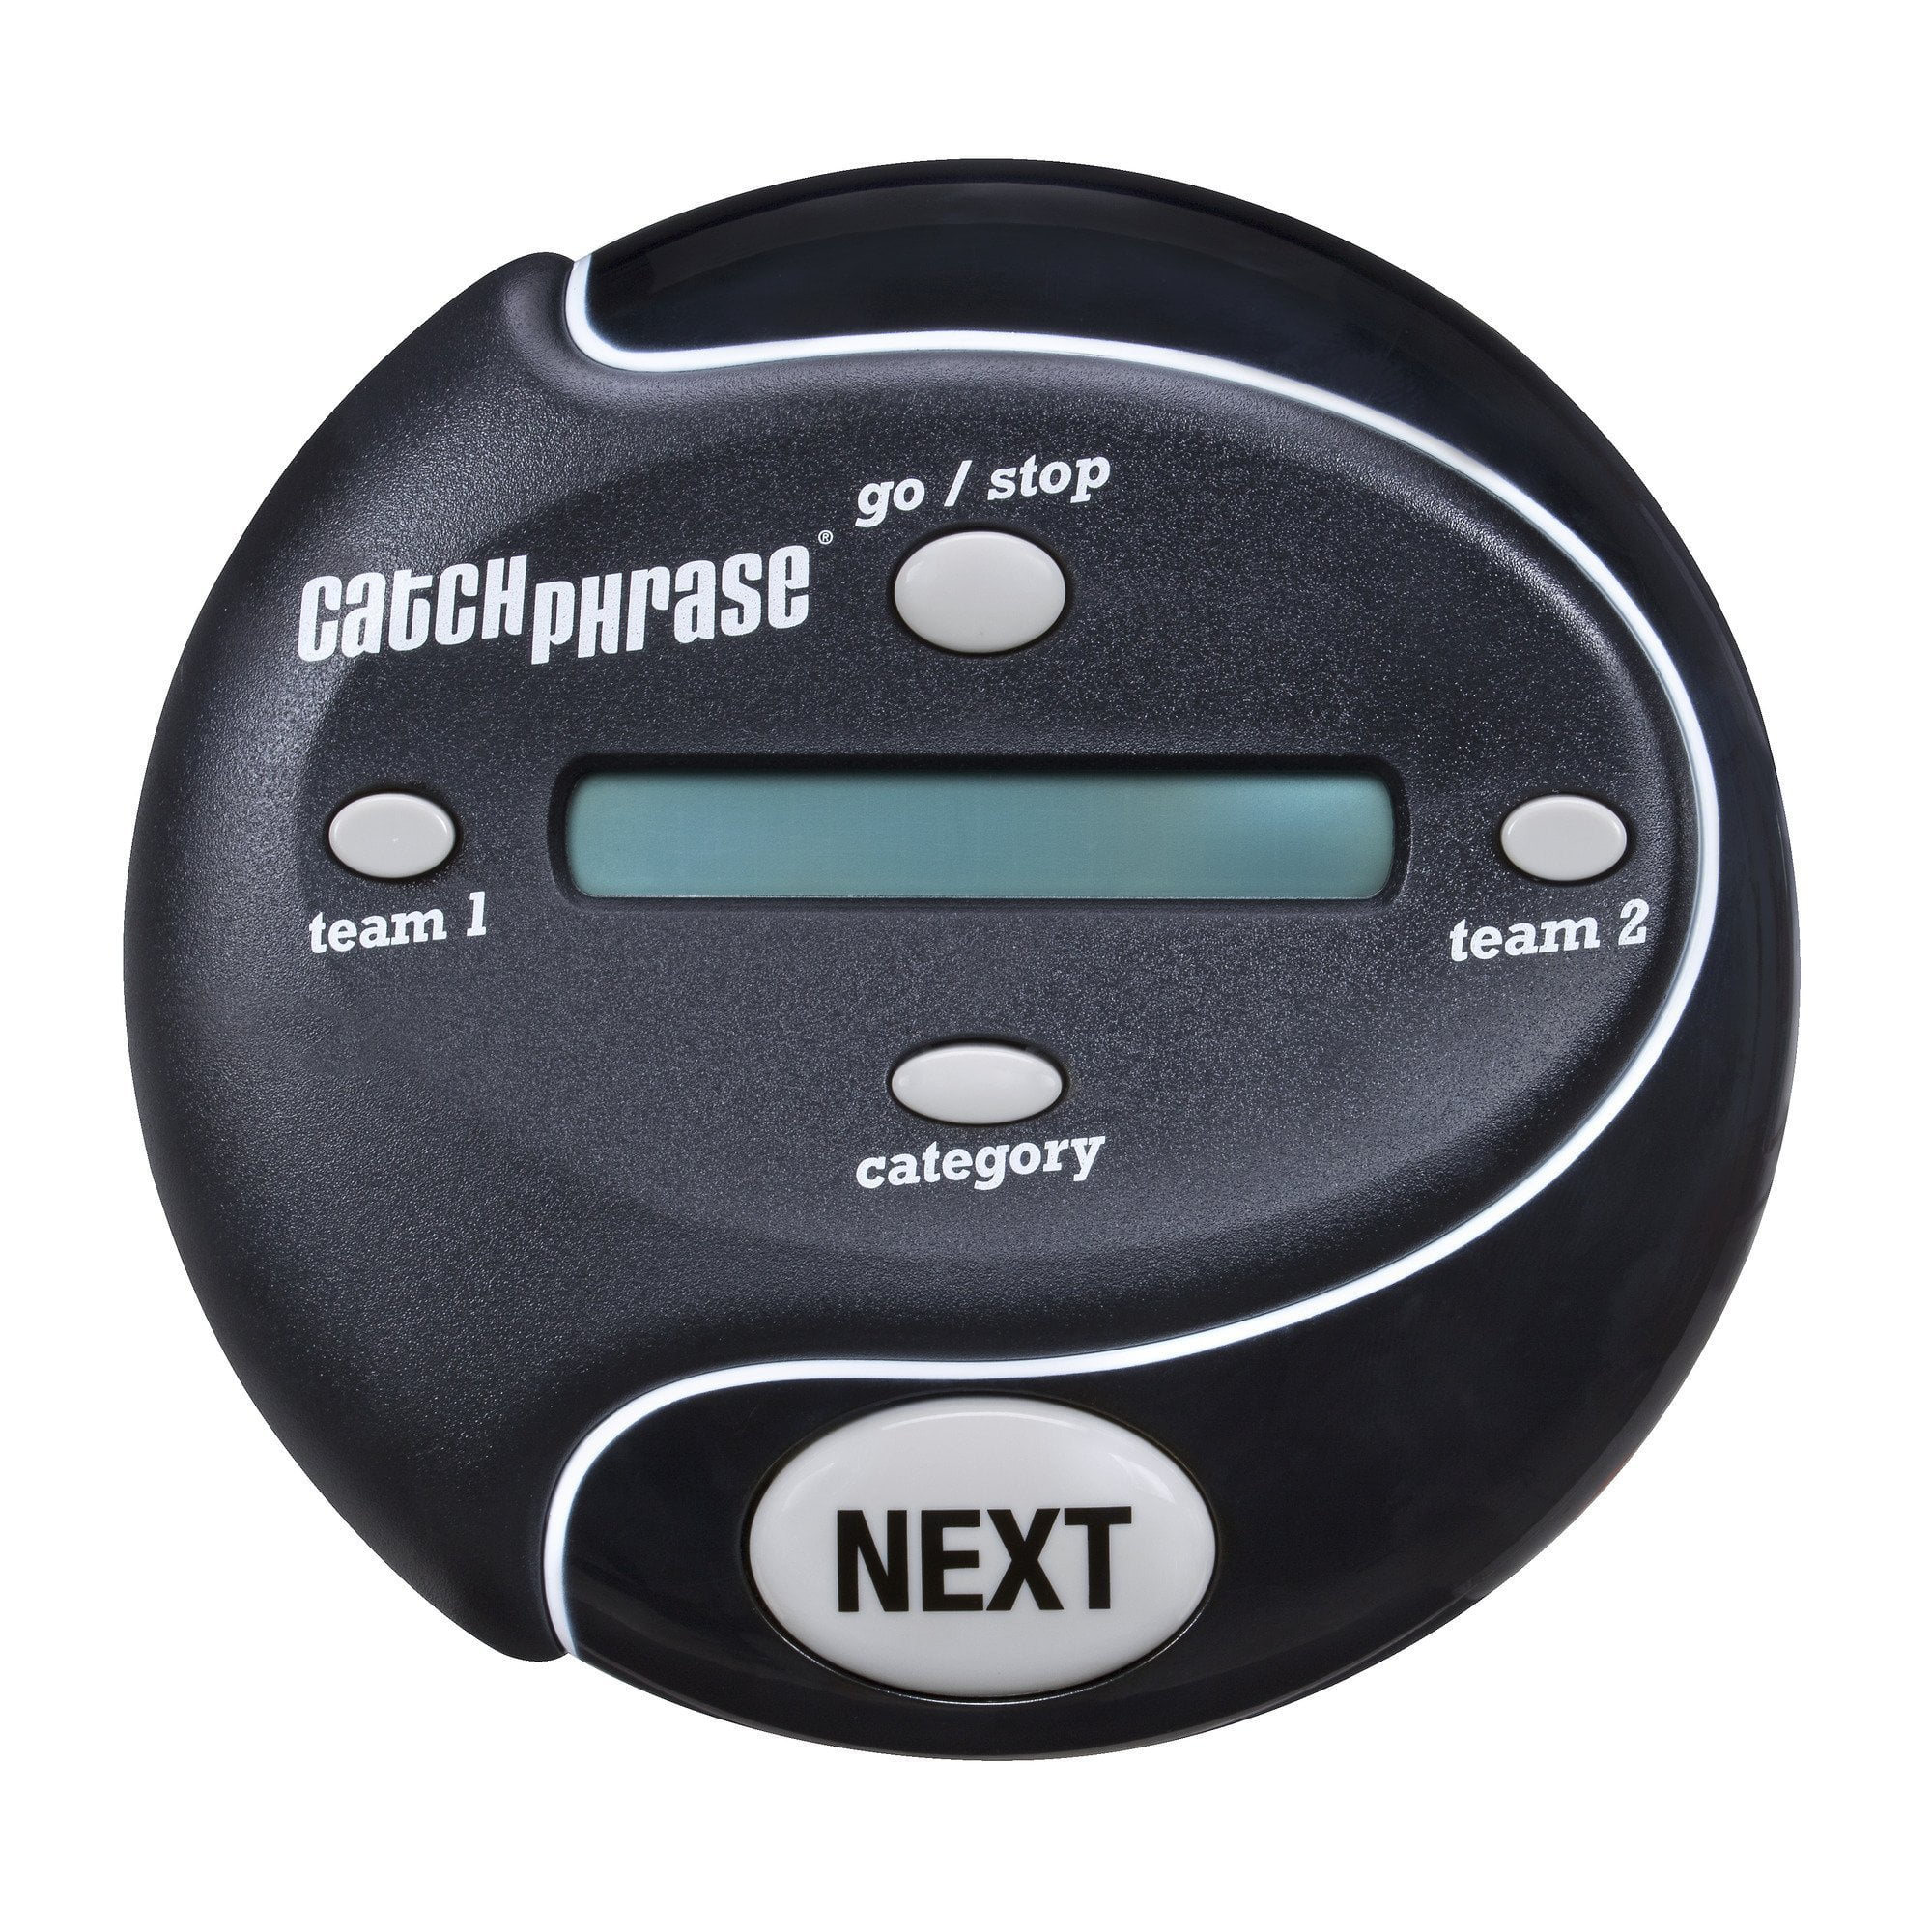 Hasbro Catch Phrase Game Frustration for sale online 